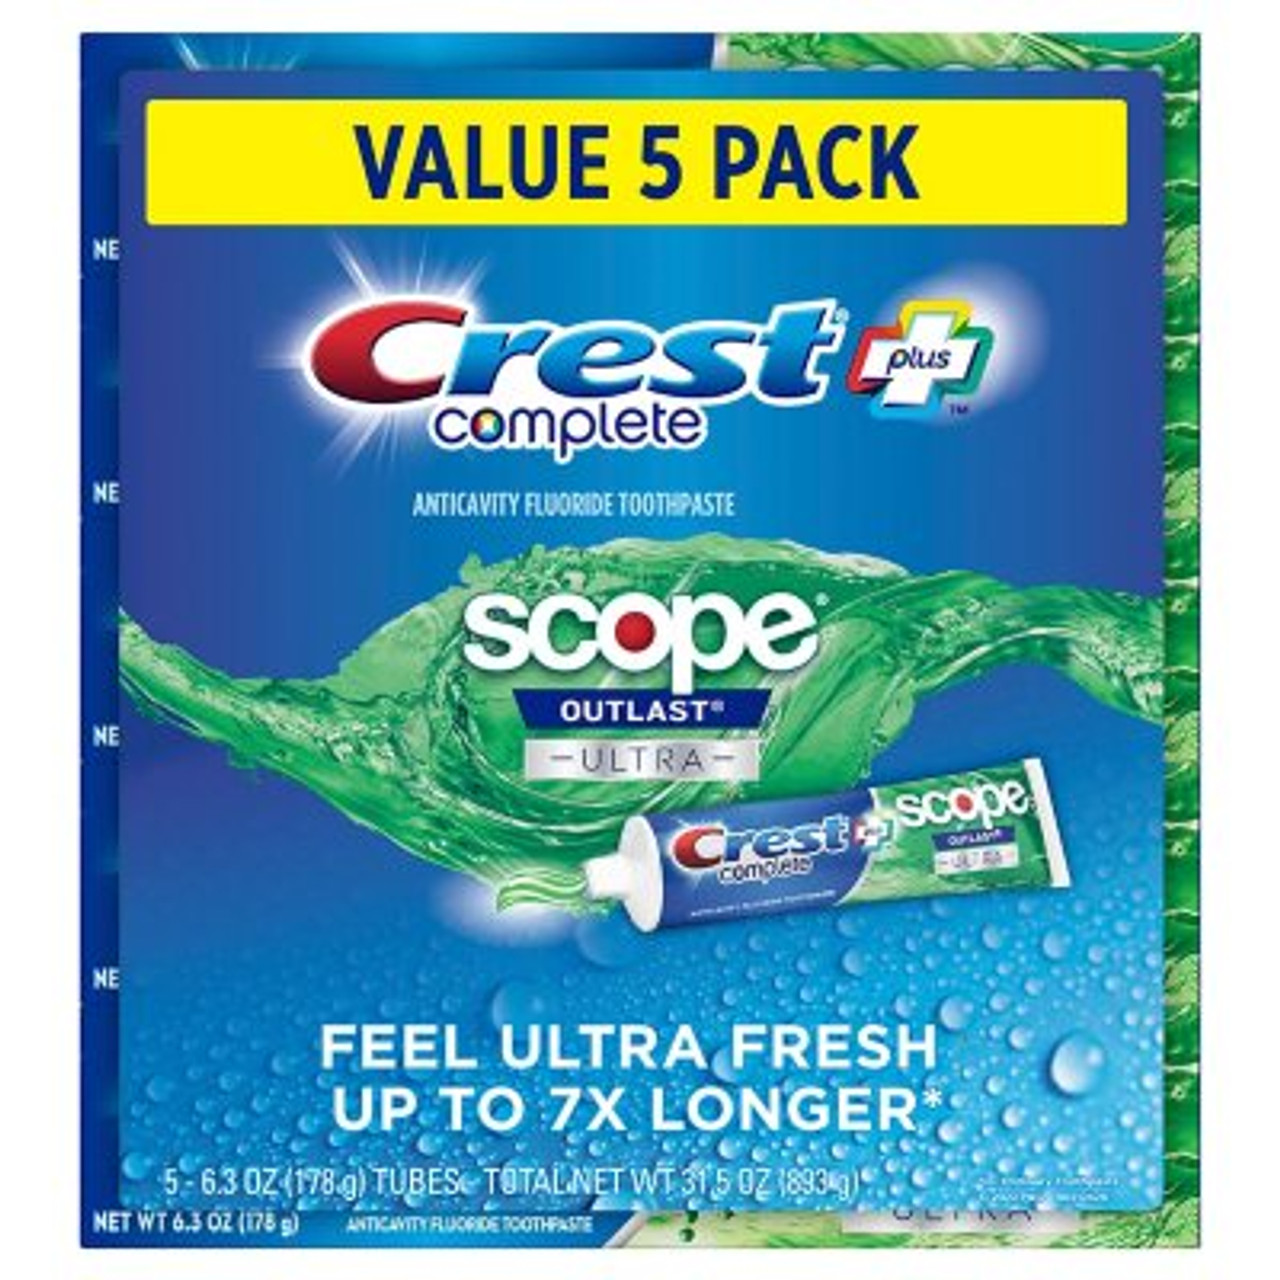 Crest Complete + Scope Outlast Ultra Toothpaste (6.3 oz., 5 pk.) - [From 46.00 - Choose pk Qty ] - *Ships from Miami